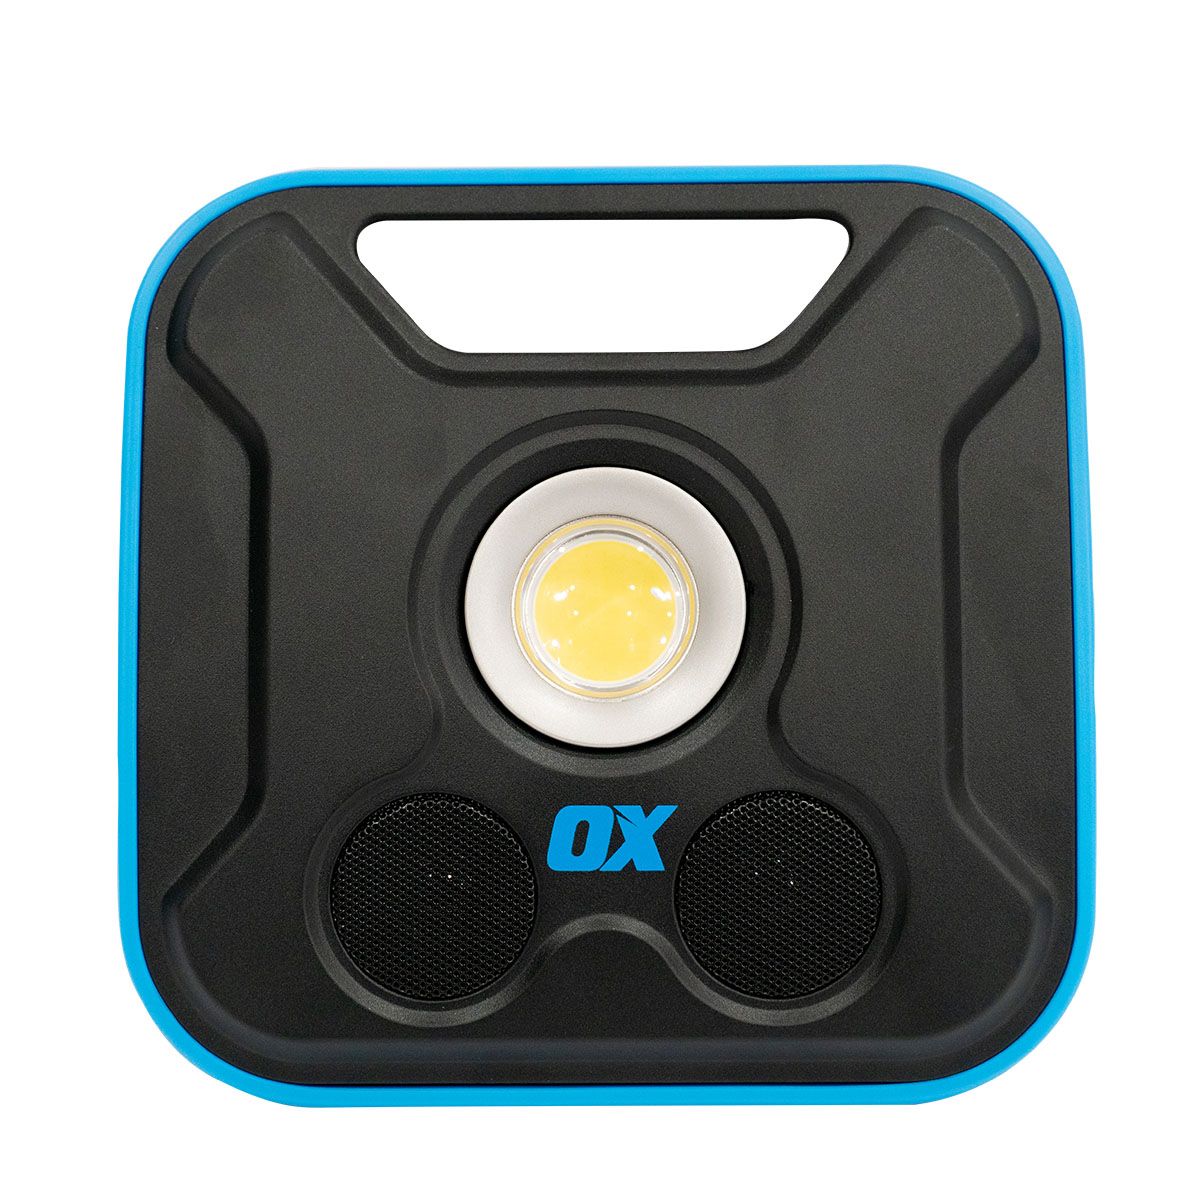 Ox Pro 2300 Lumen Led Work Light With Inbuilt Wireless Rechargeable Speakers OX-P311023 by Ox